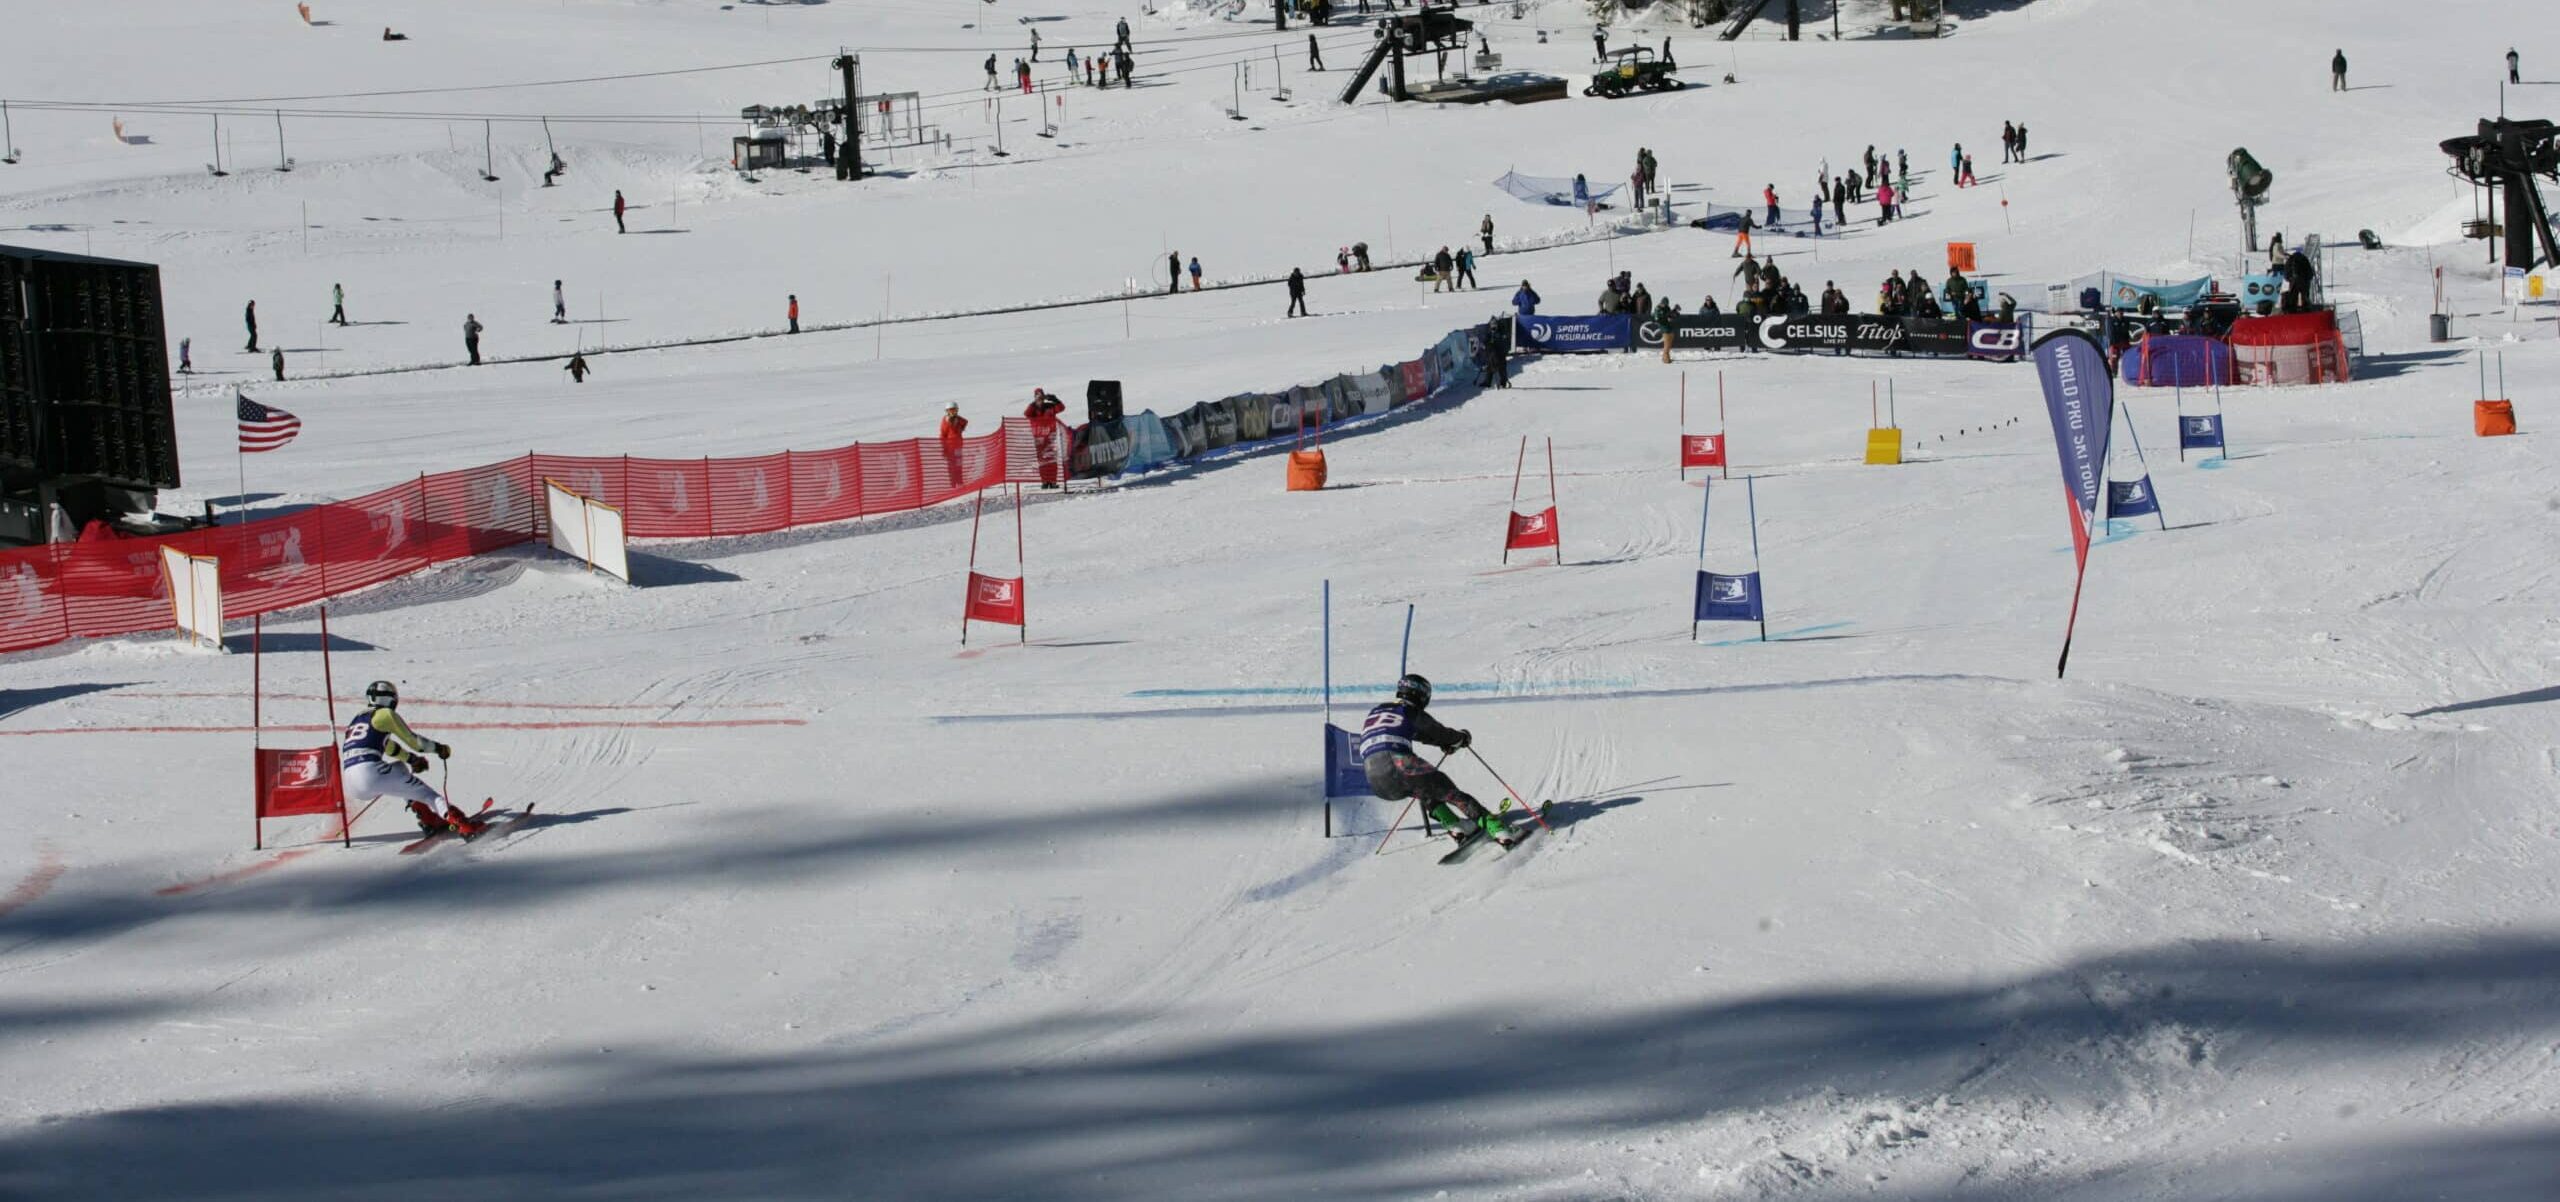 VIDEO: Get excited for the Taos WPST World Championships